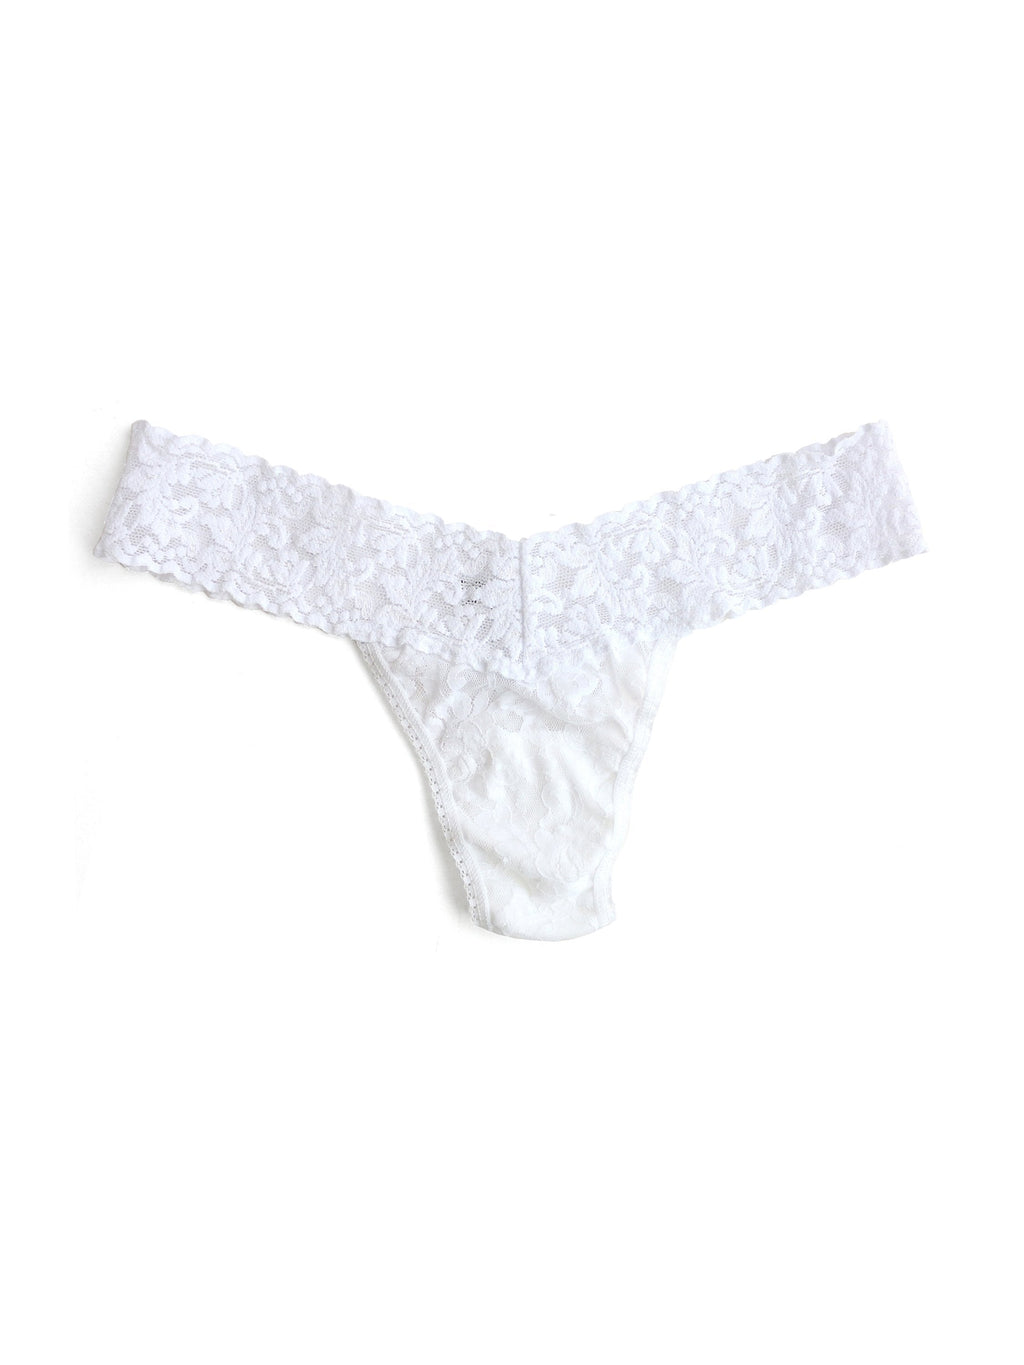 Signature Lace Low Rise Thong White | Hanky Panky